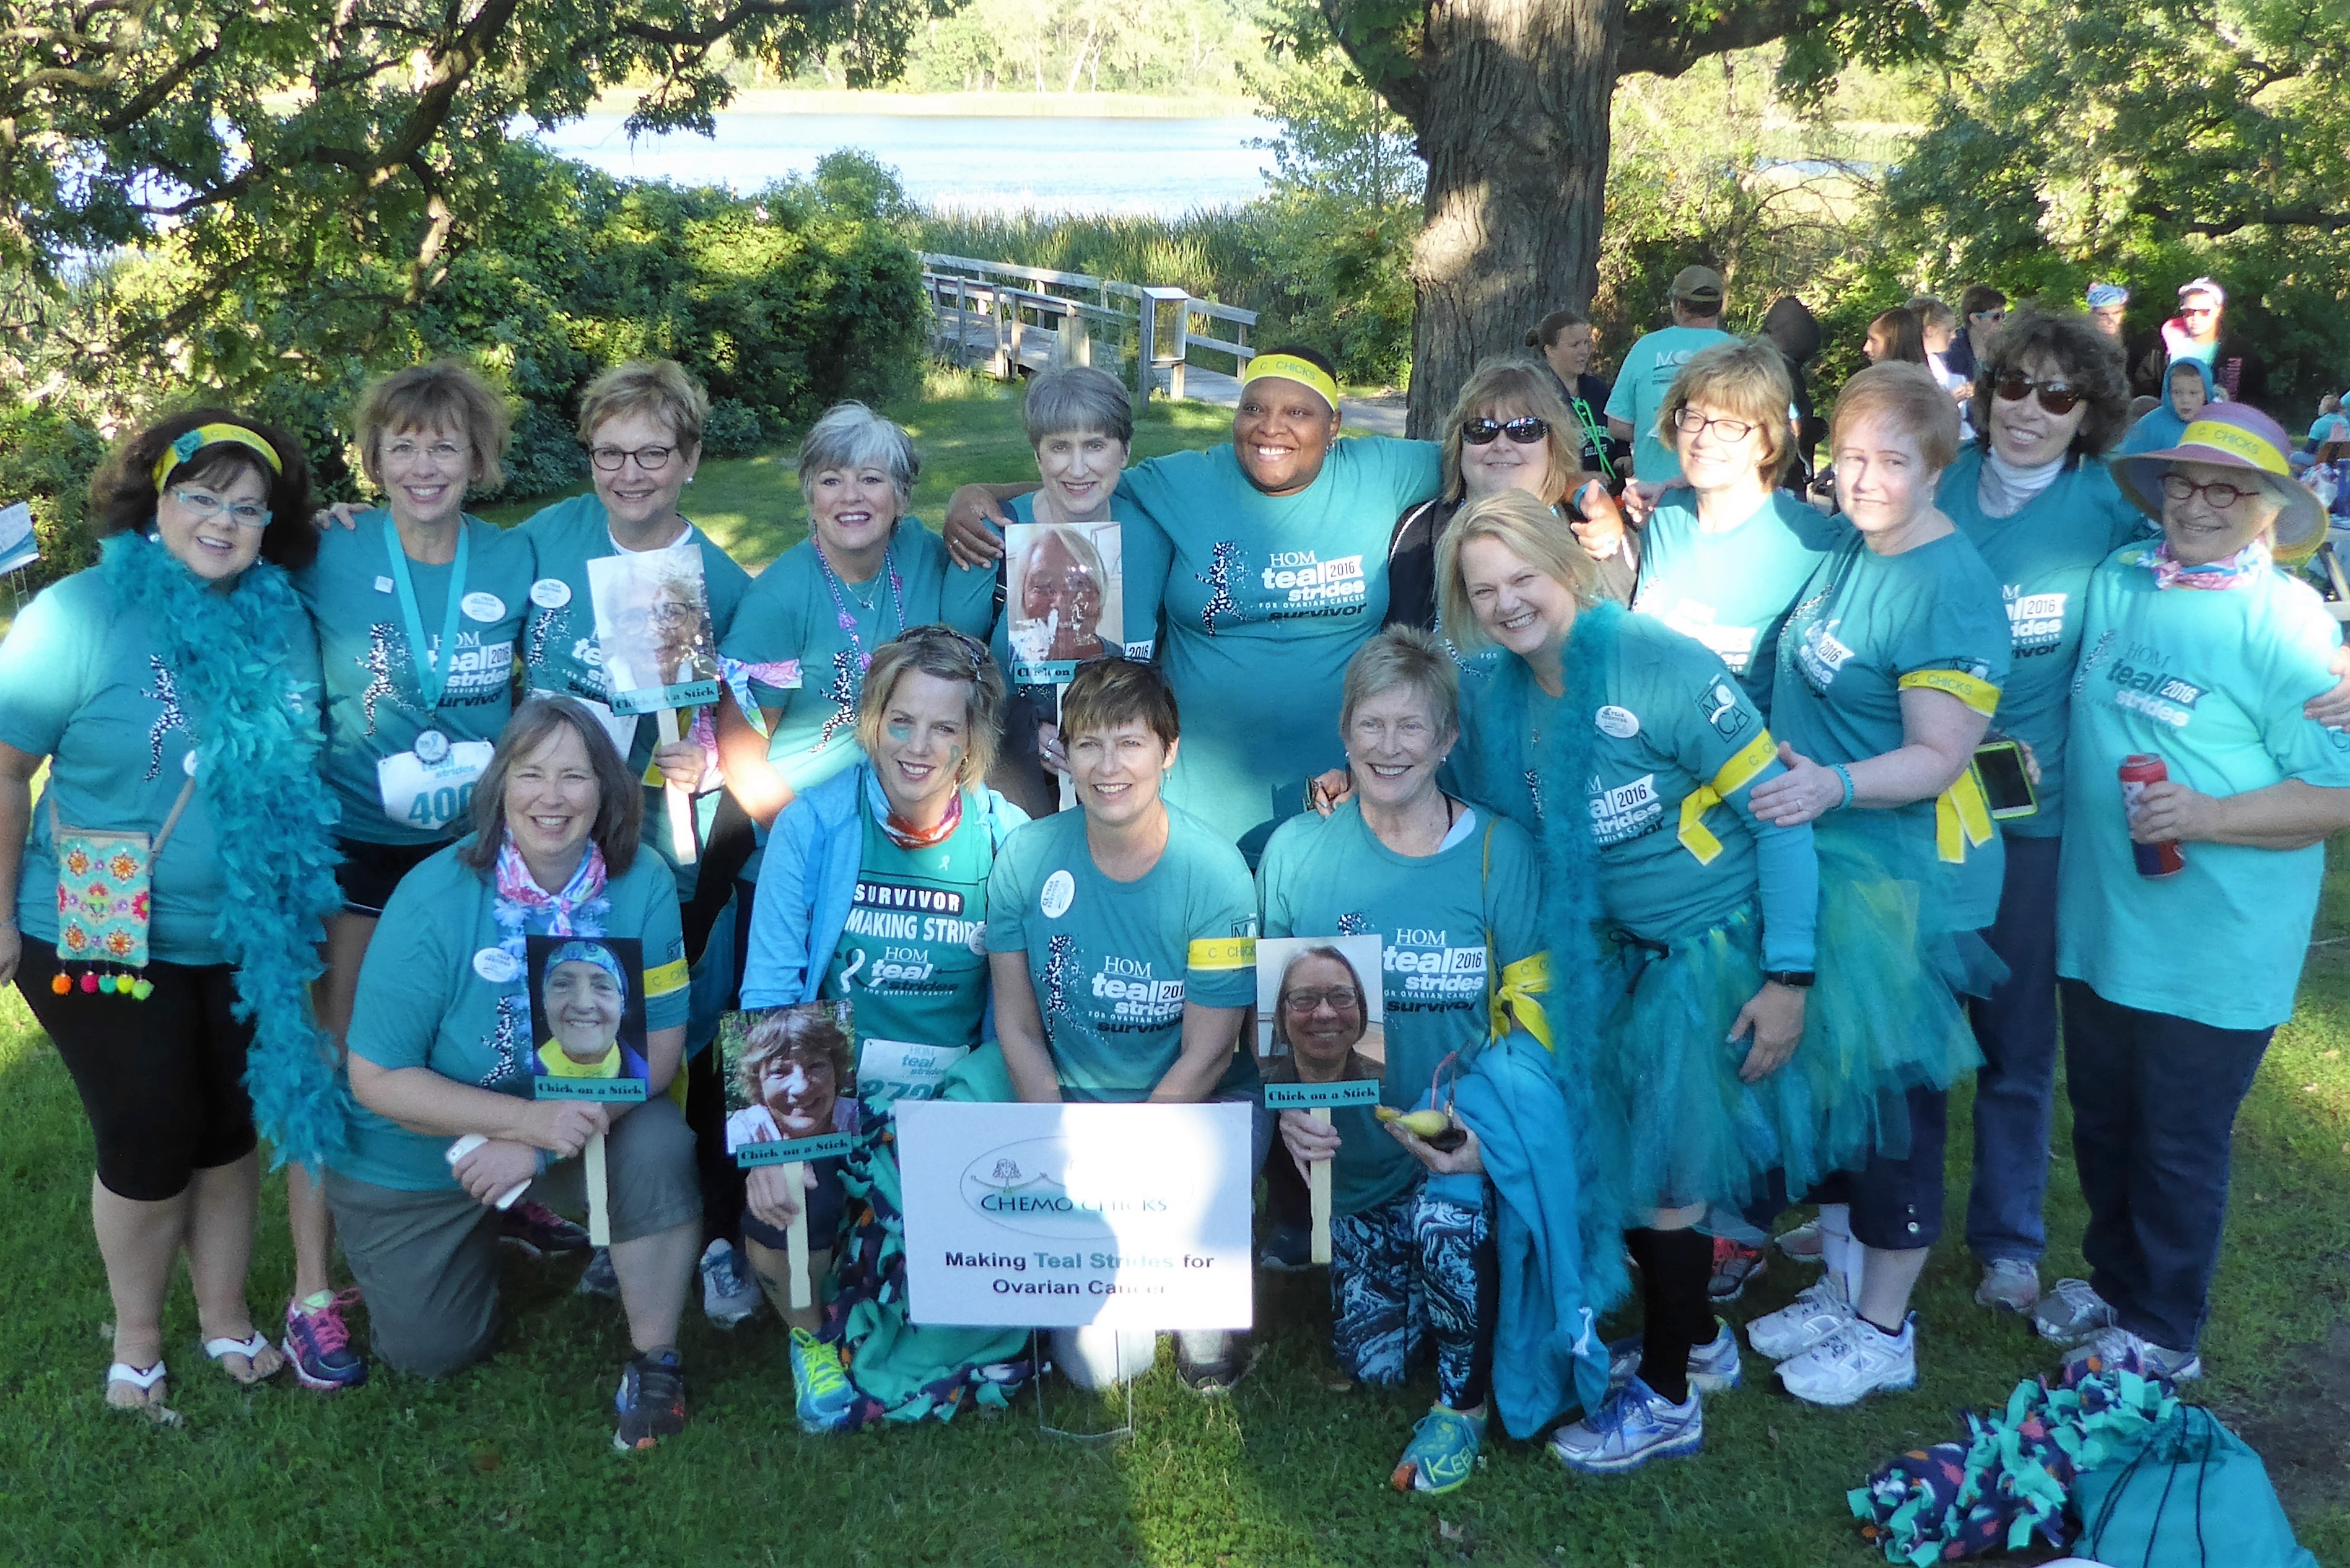 2016 Teal Strides with the Chemo Chicks